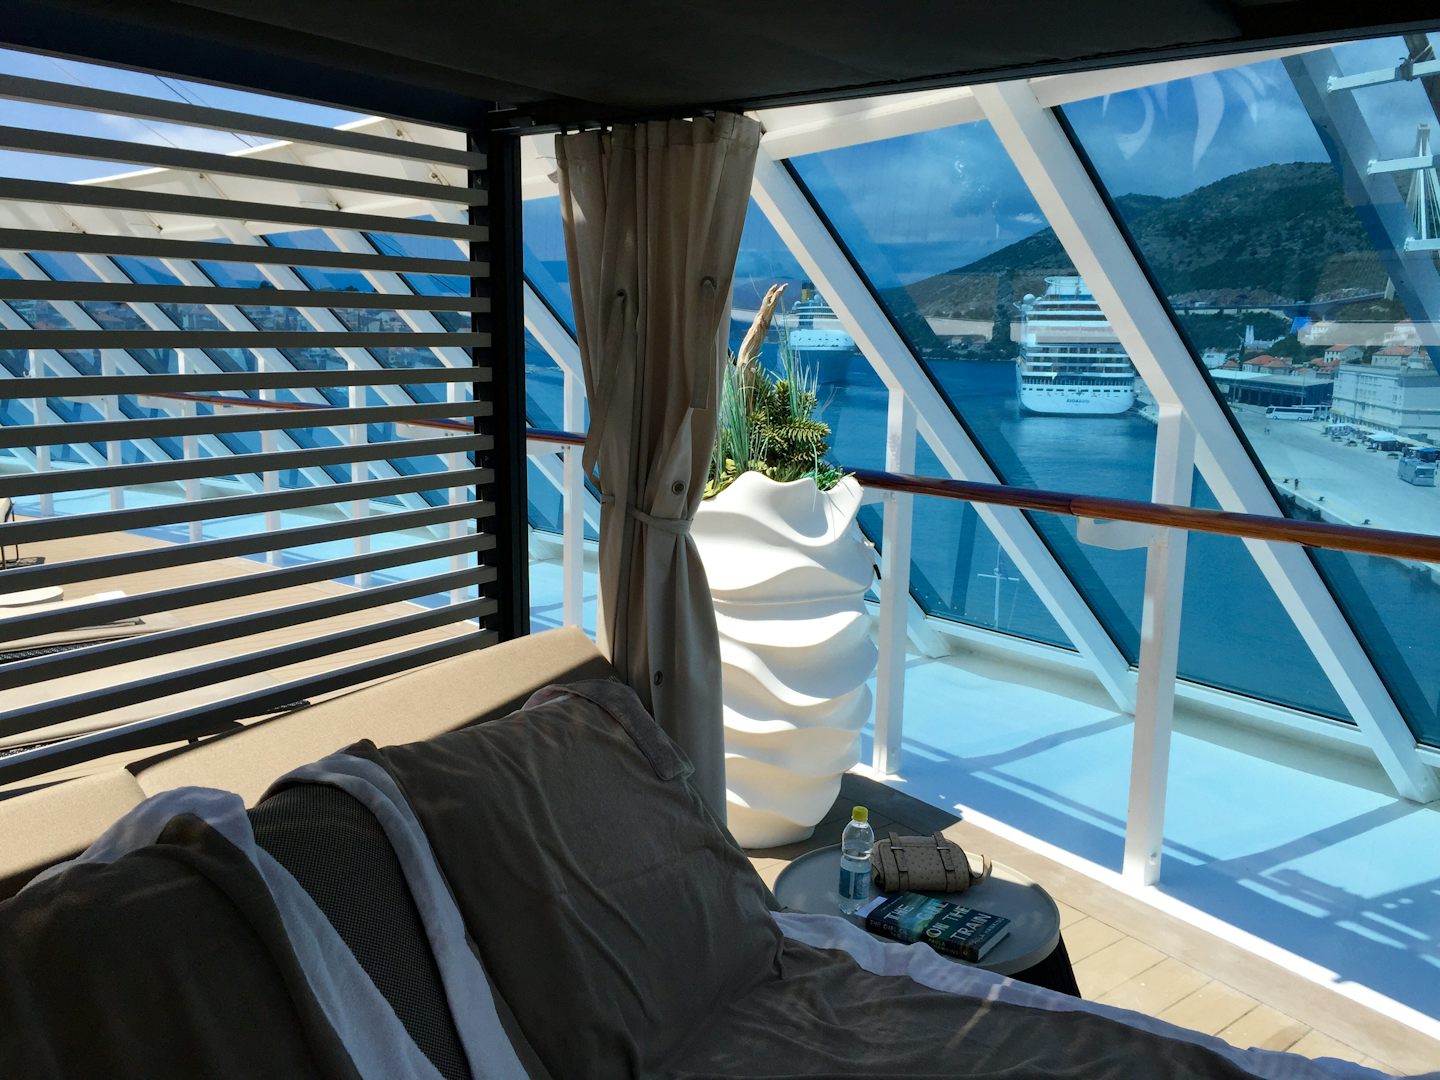 Outdoor day bed poolside at the back of the ship with elegant white drapes.